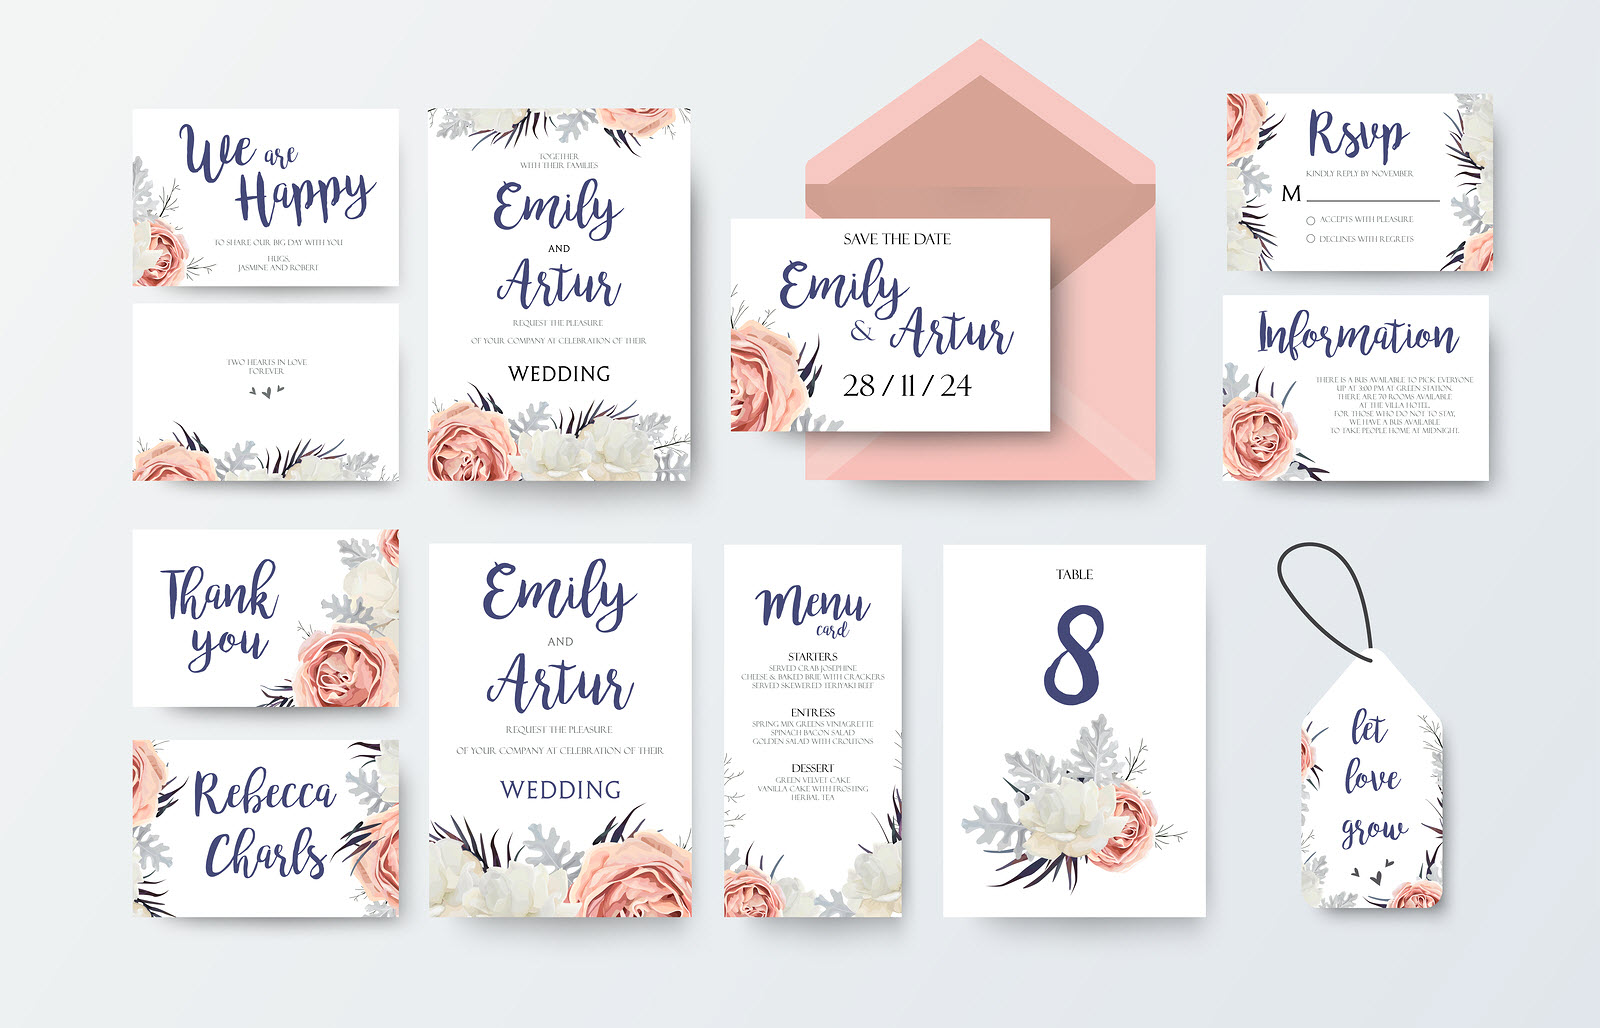 Best Printers For DIY Wedding Invitations Printer Guides And Tips 